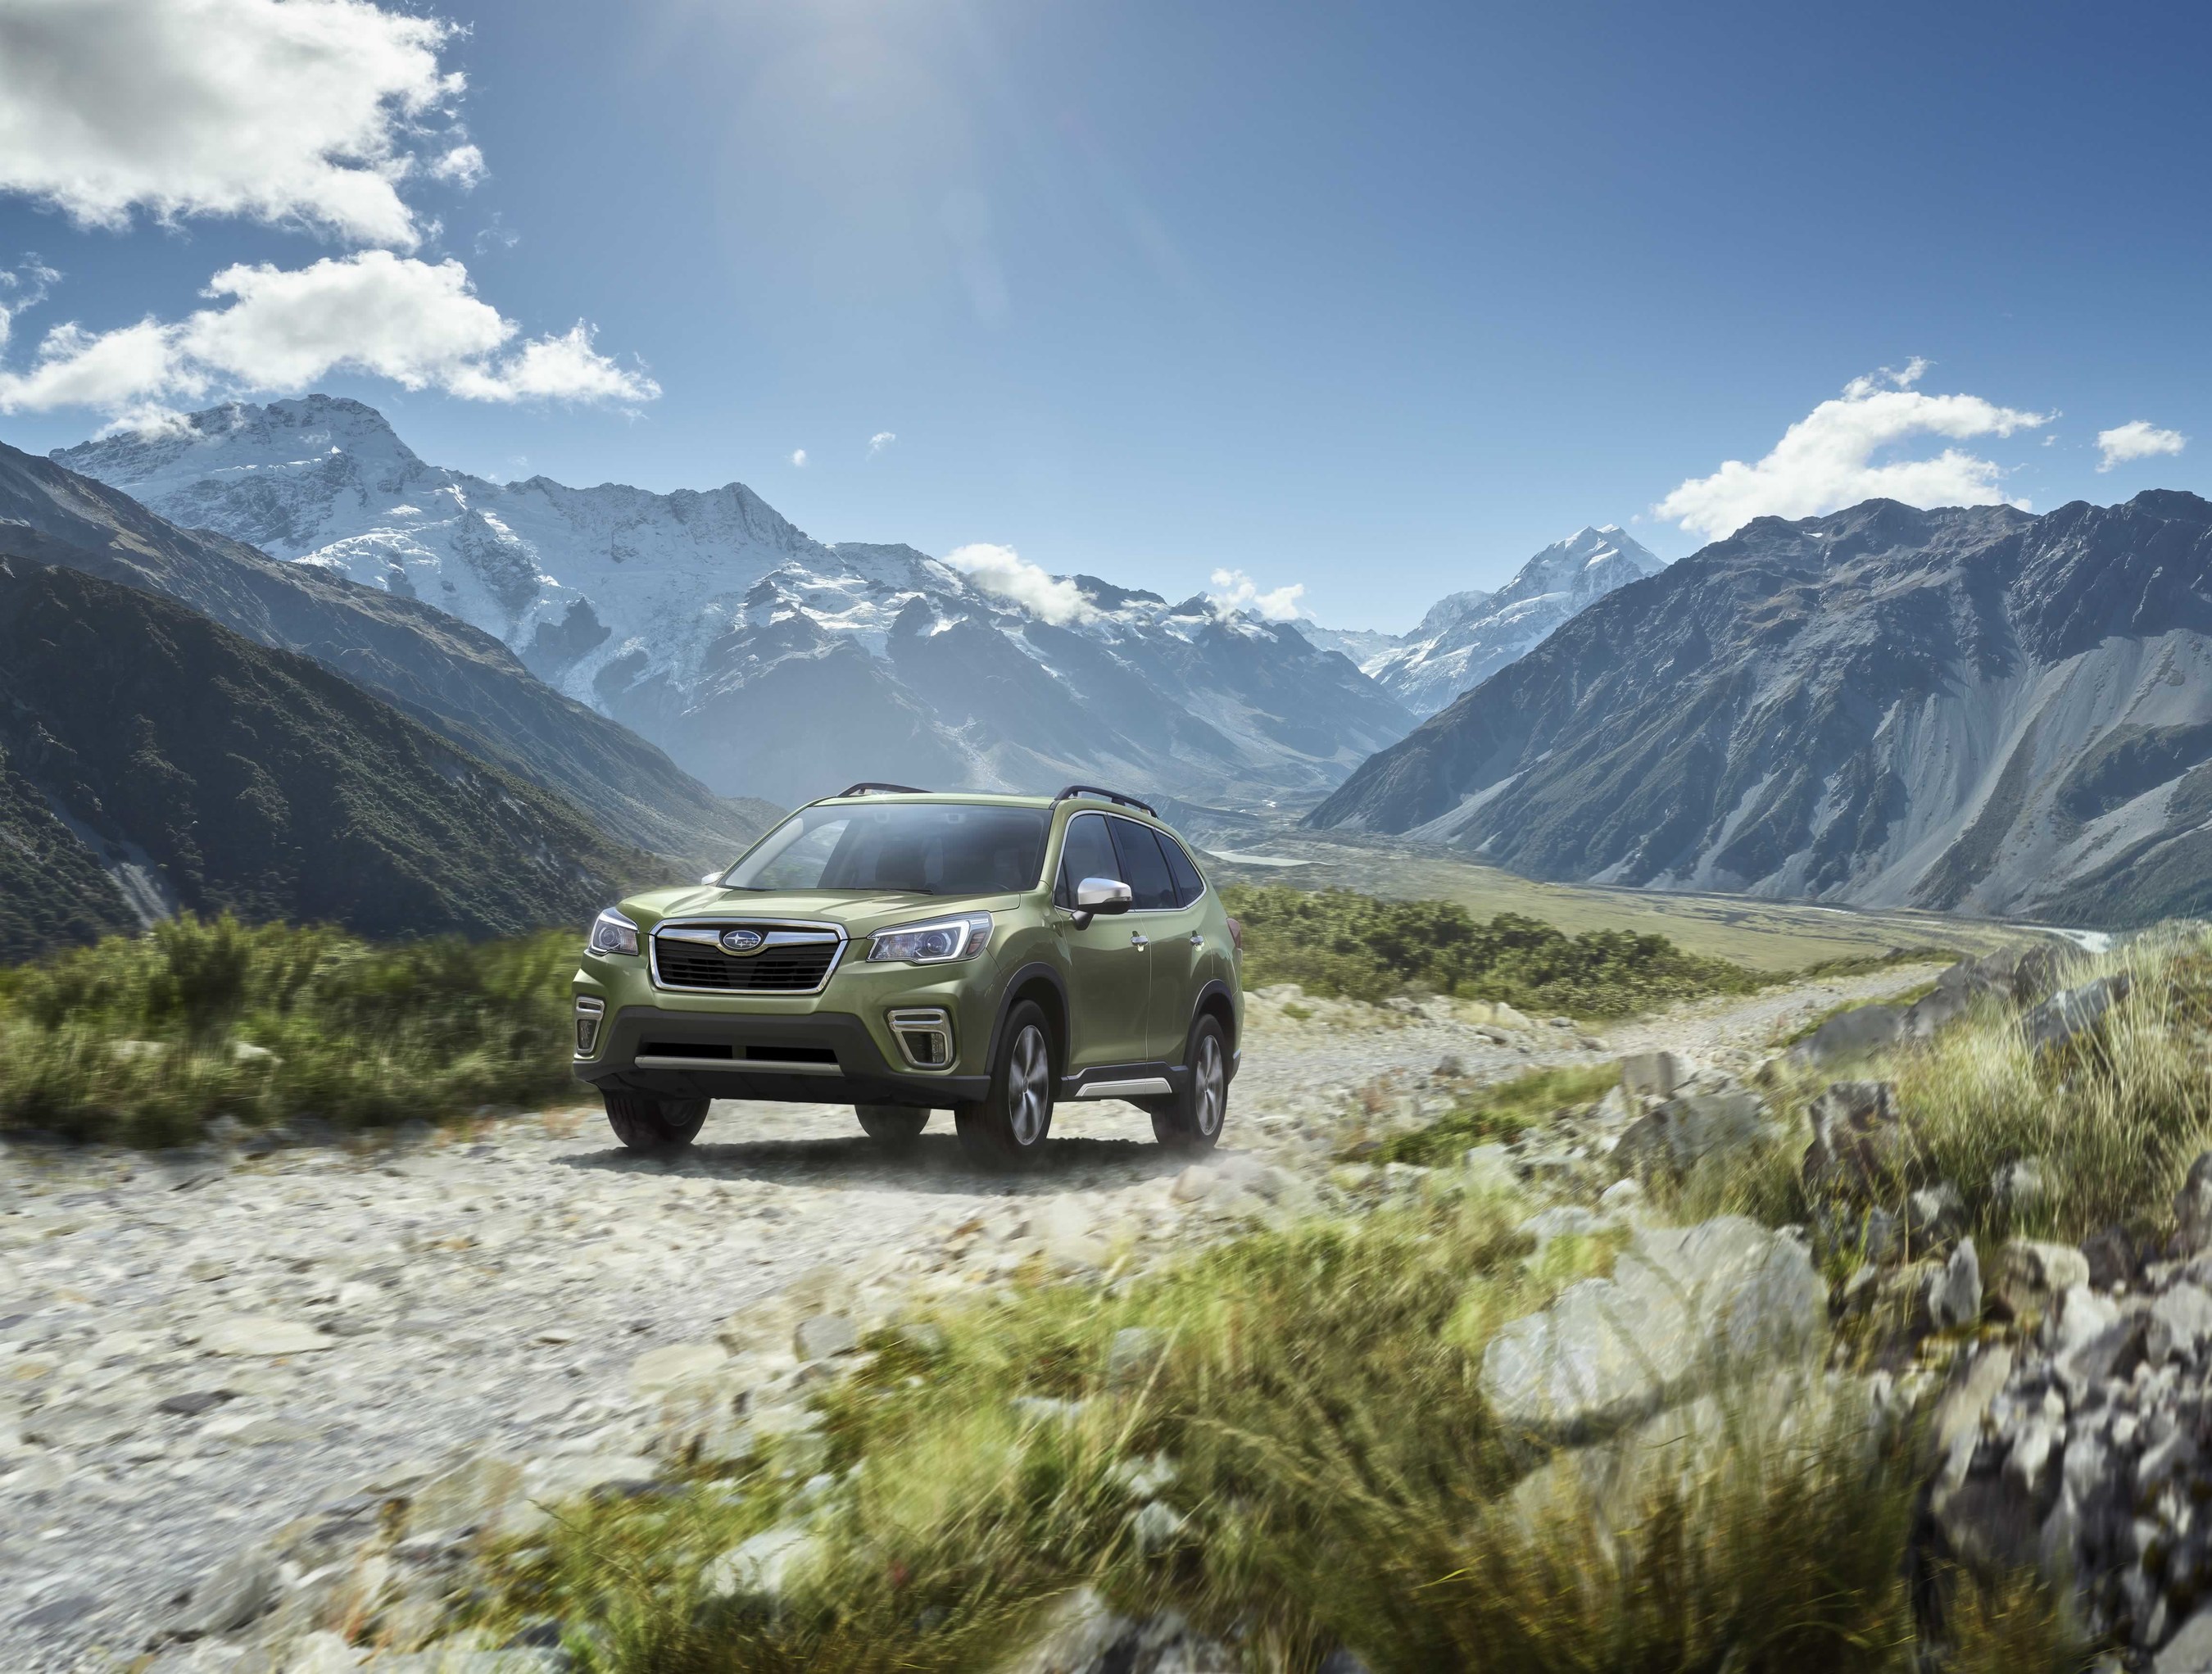 Subaru Canada Announces 2020 Forester Pricing: Enhanced Safety, Connectivity and New Convenience Features